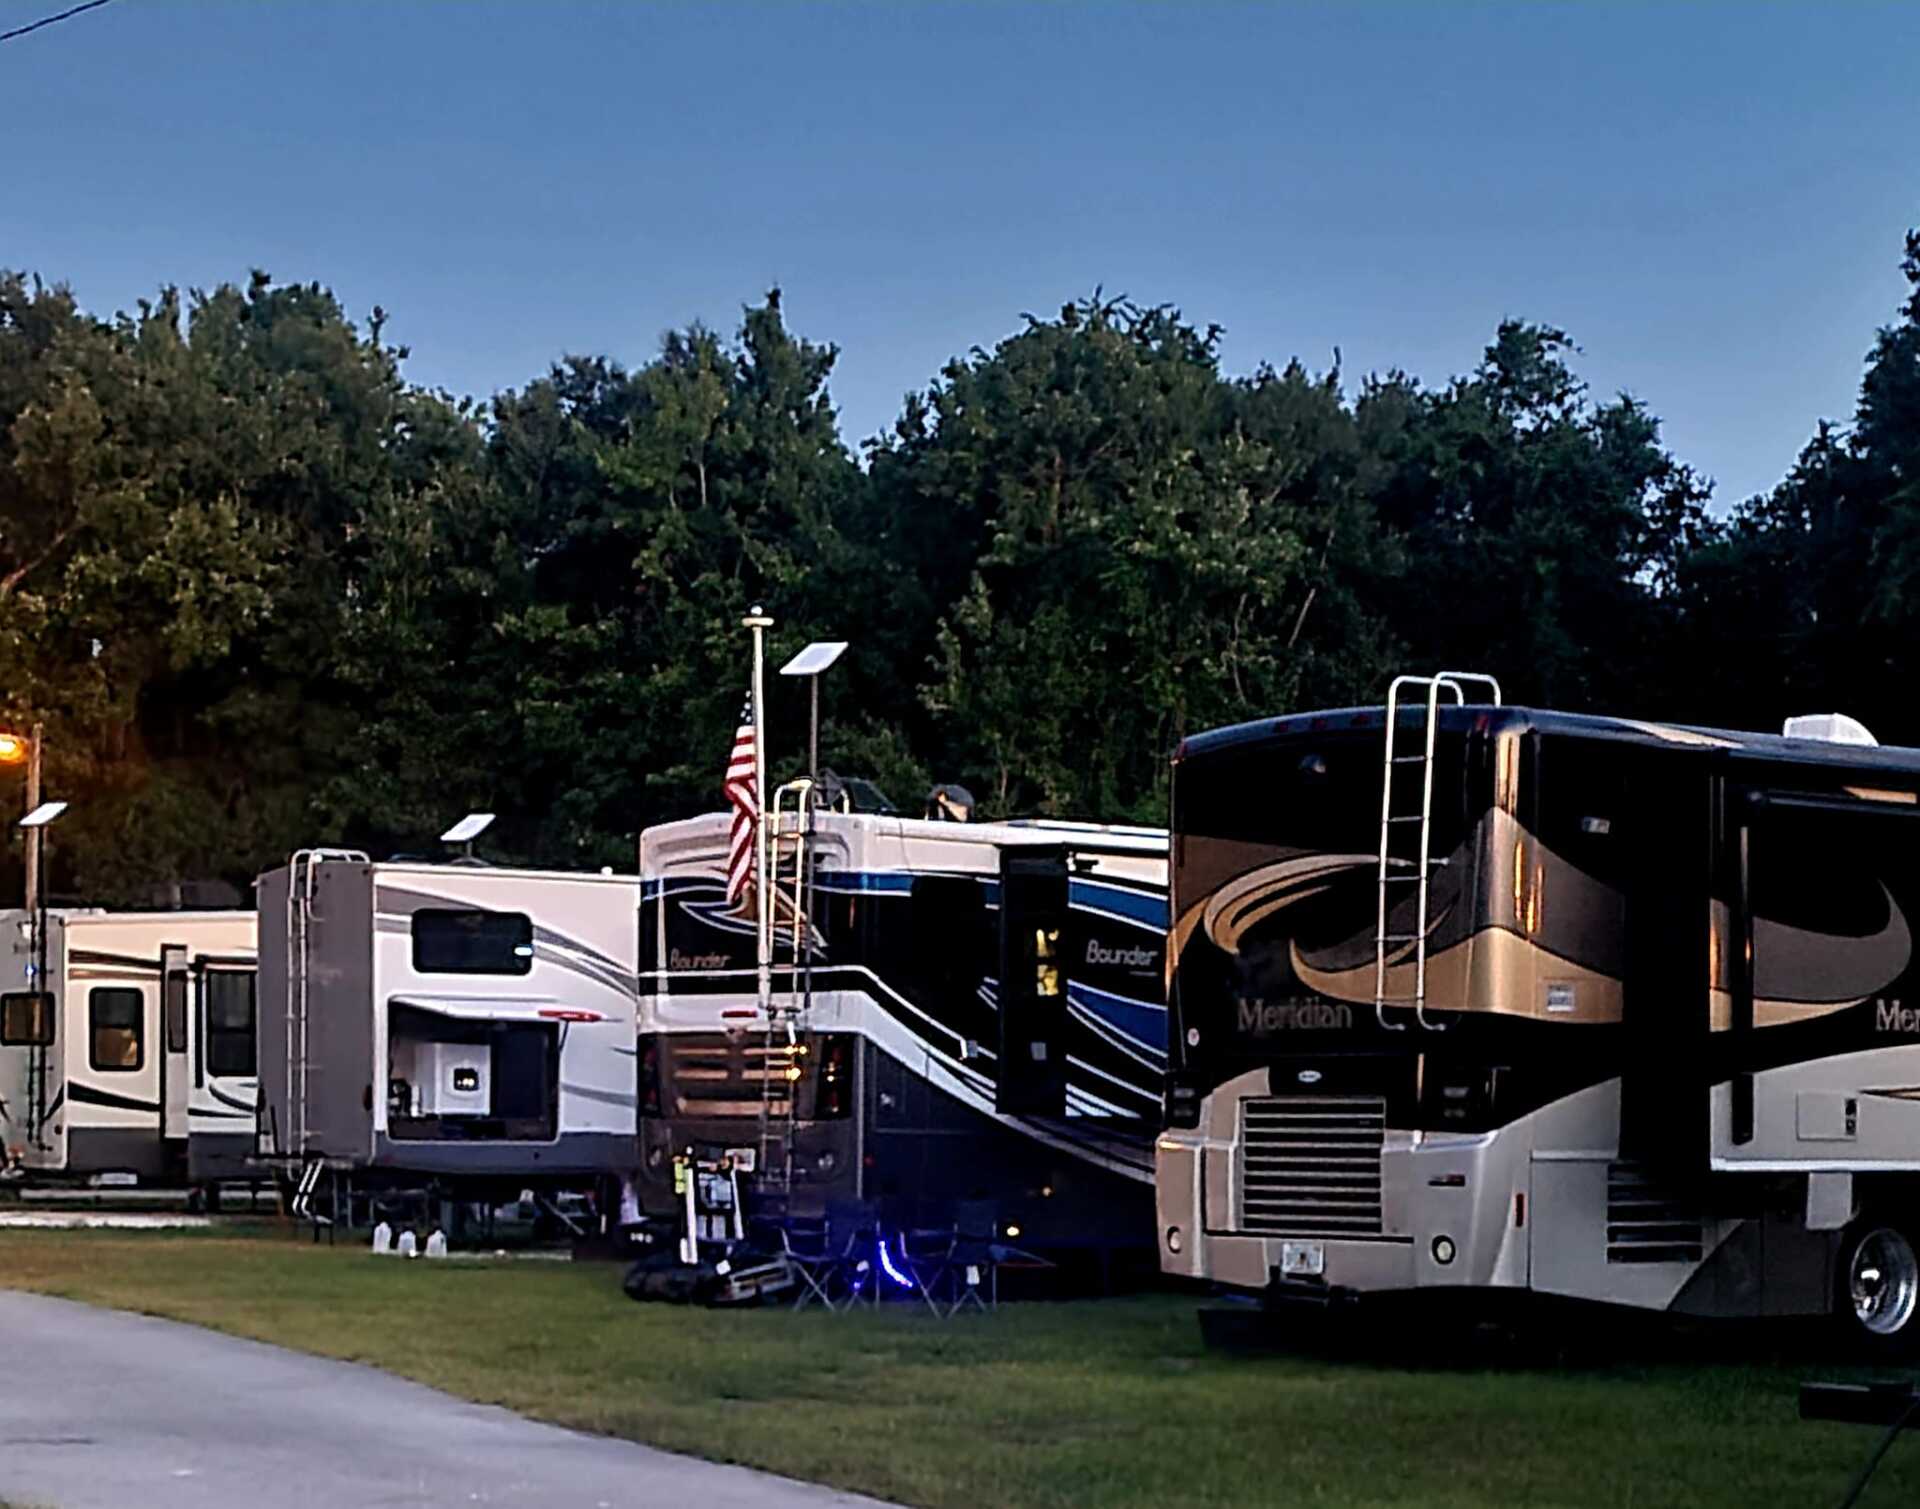 A row of rv 's are parked in a grassy area with trees in the background